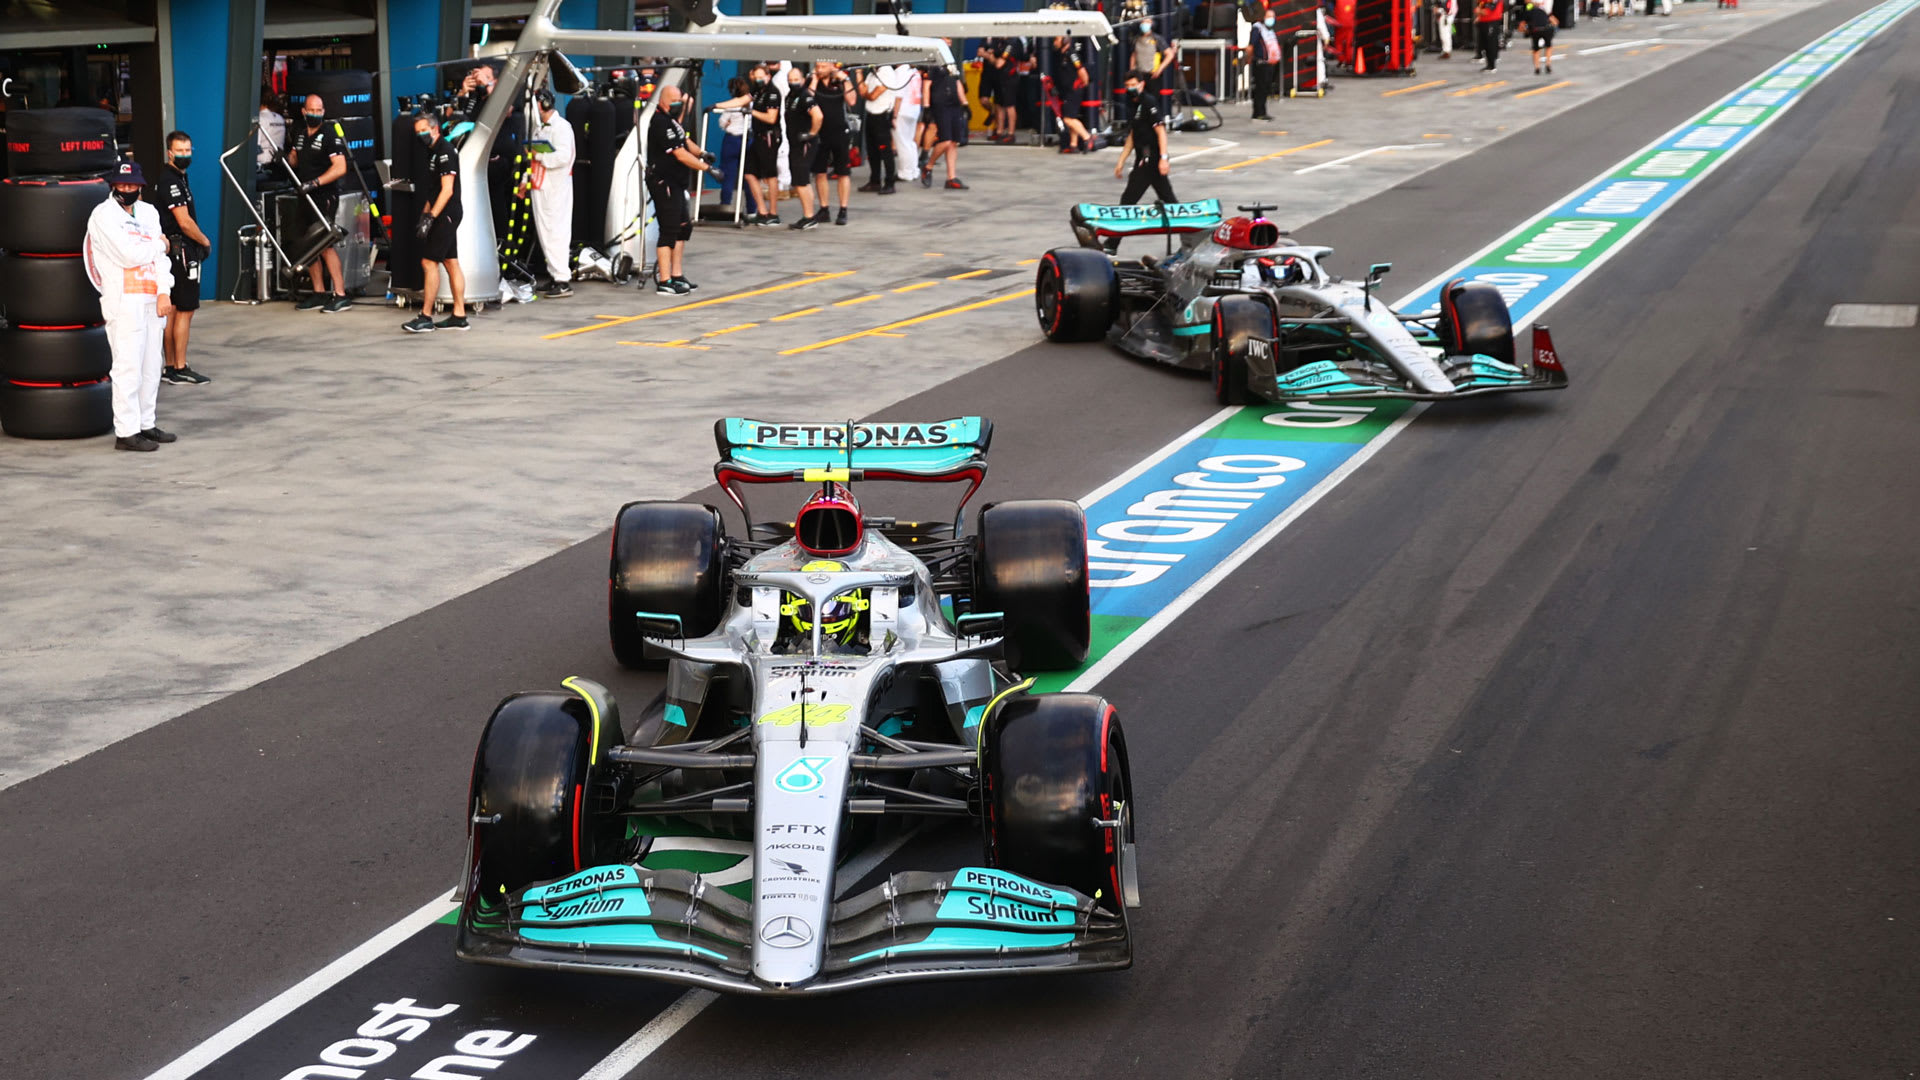 Our car does not deserve to win a race, says Mercedes F1 boss